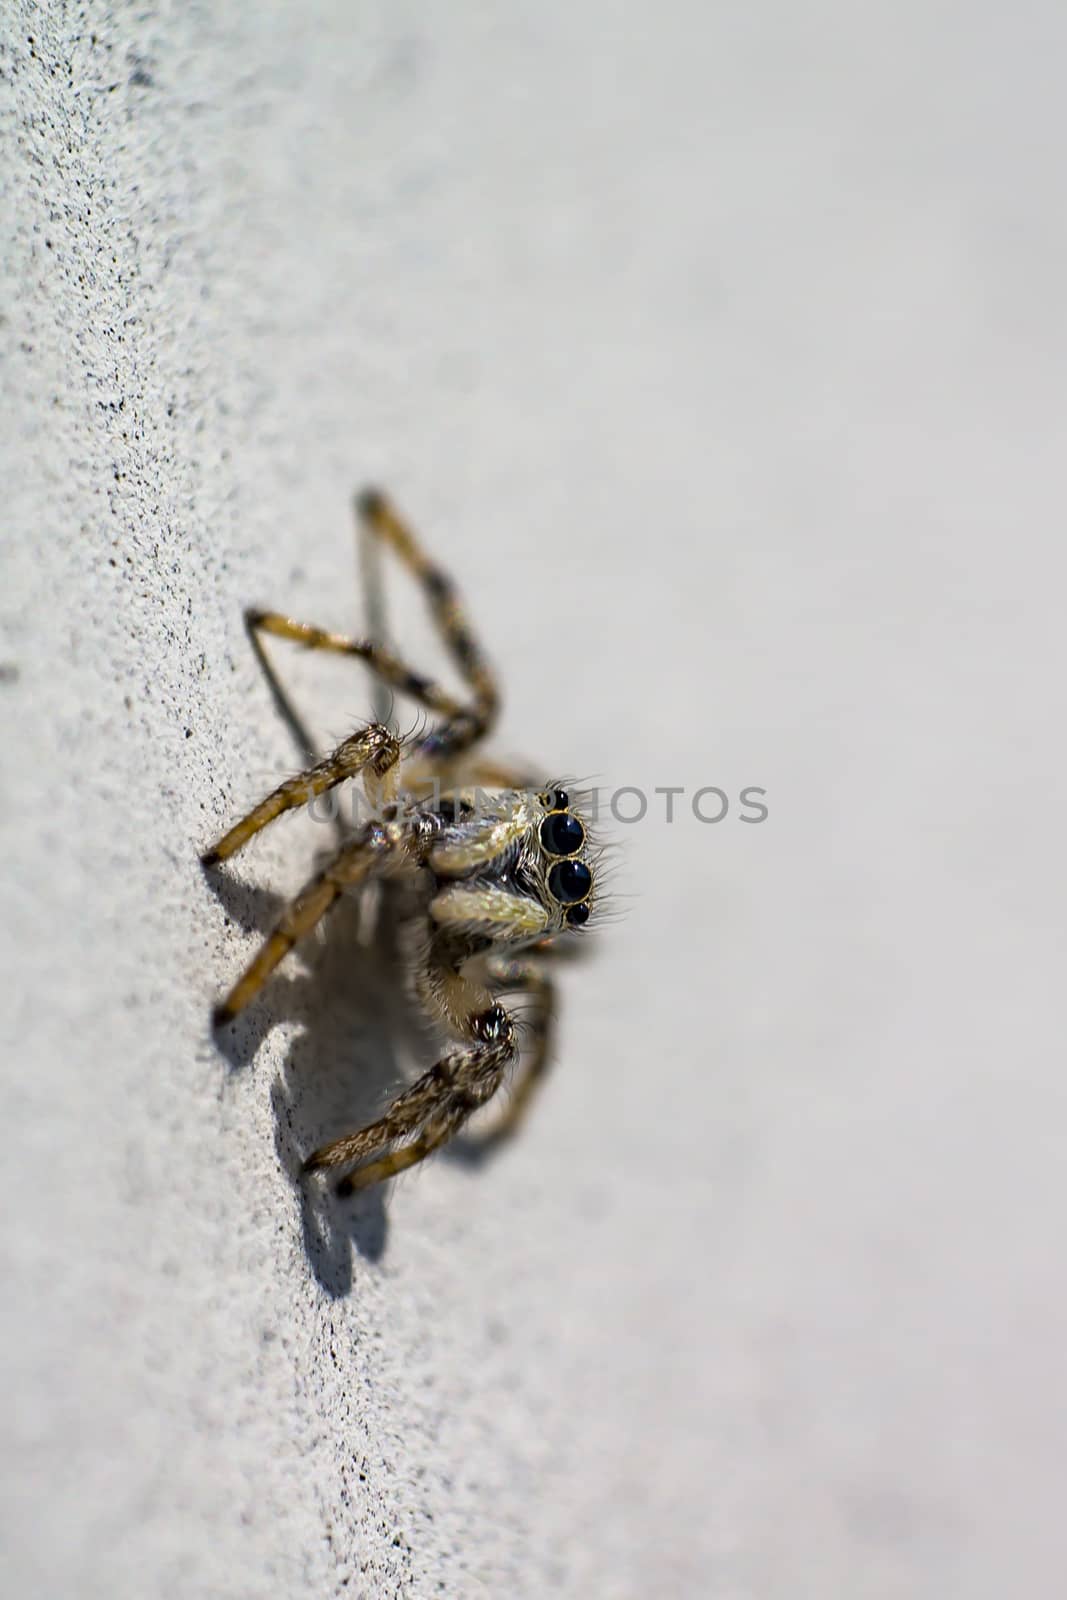 small insect zebra jumping spider in spring season